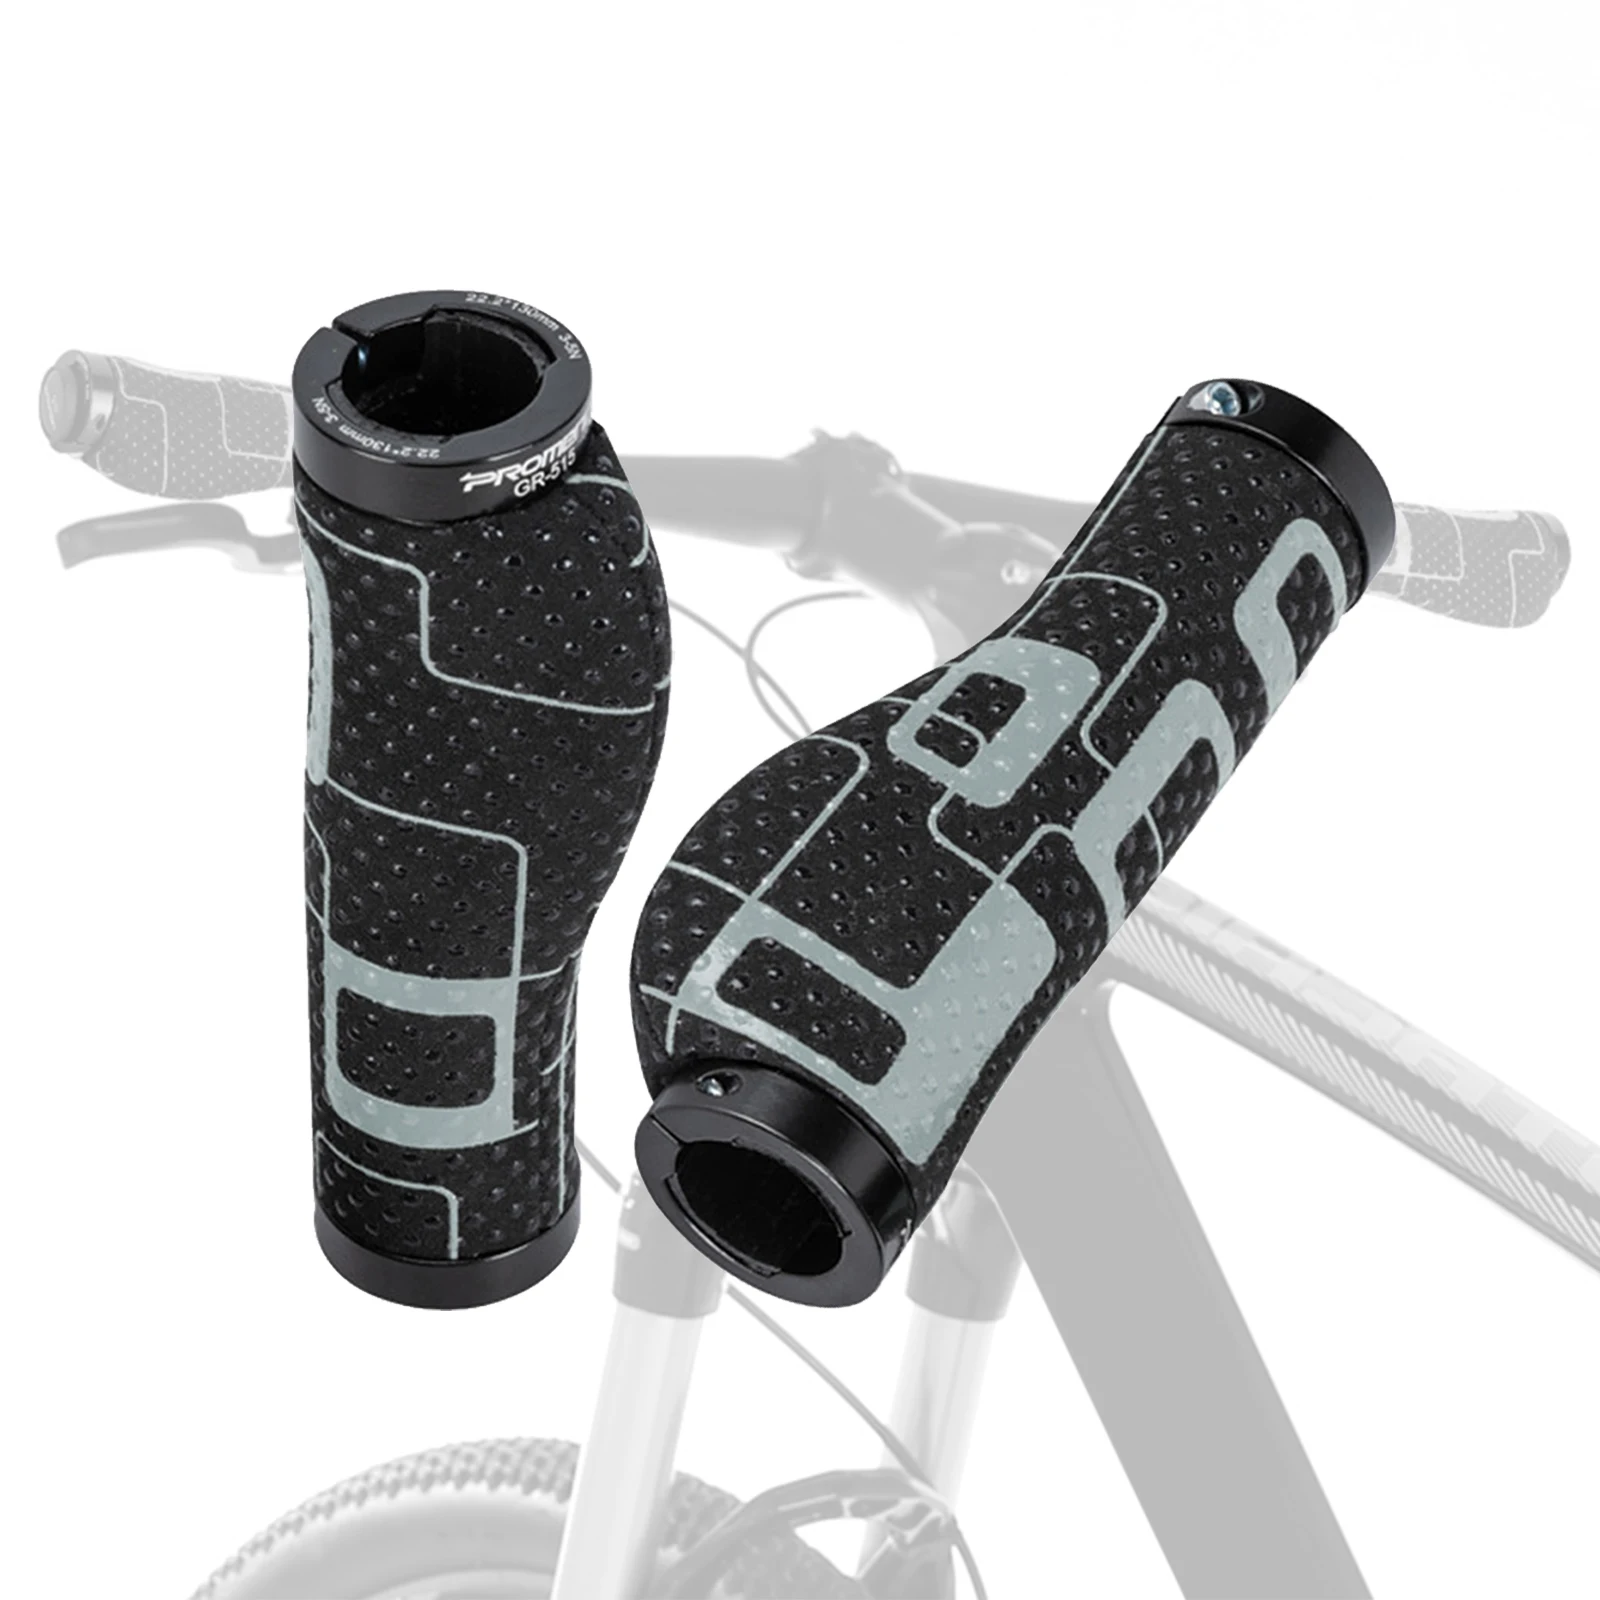 1 pair of silicone non-slip bicycle handles Comfortable handlebars are specially designed for mountain bicycle riding